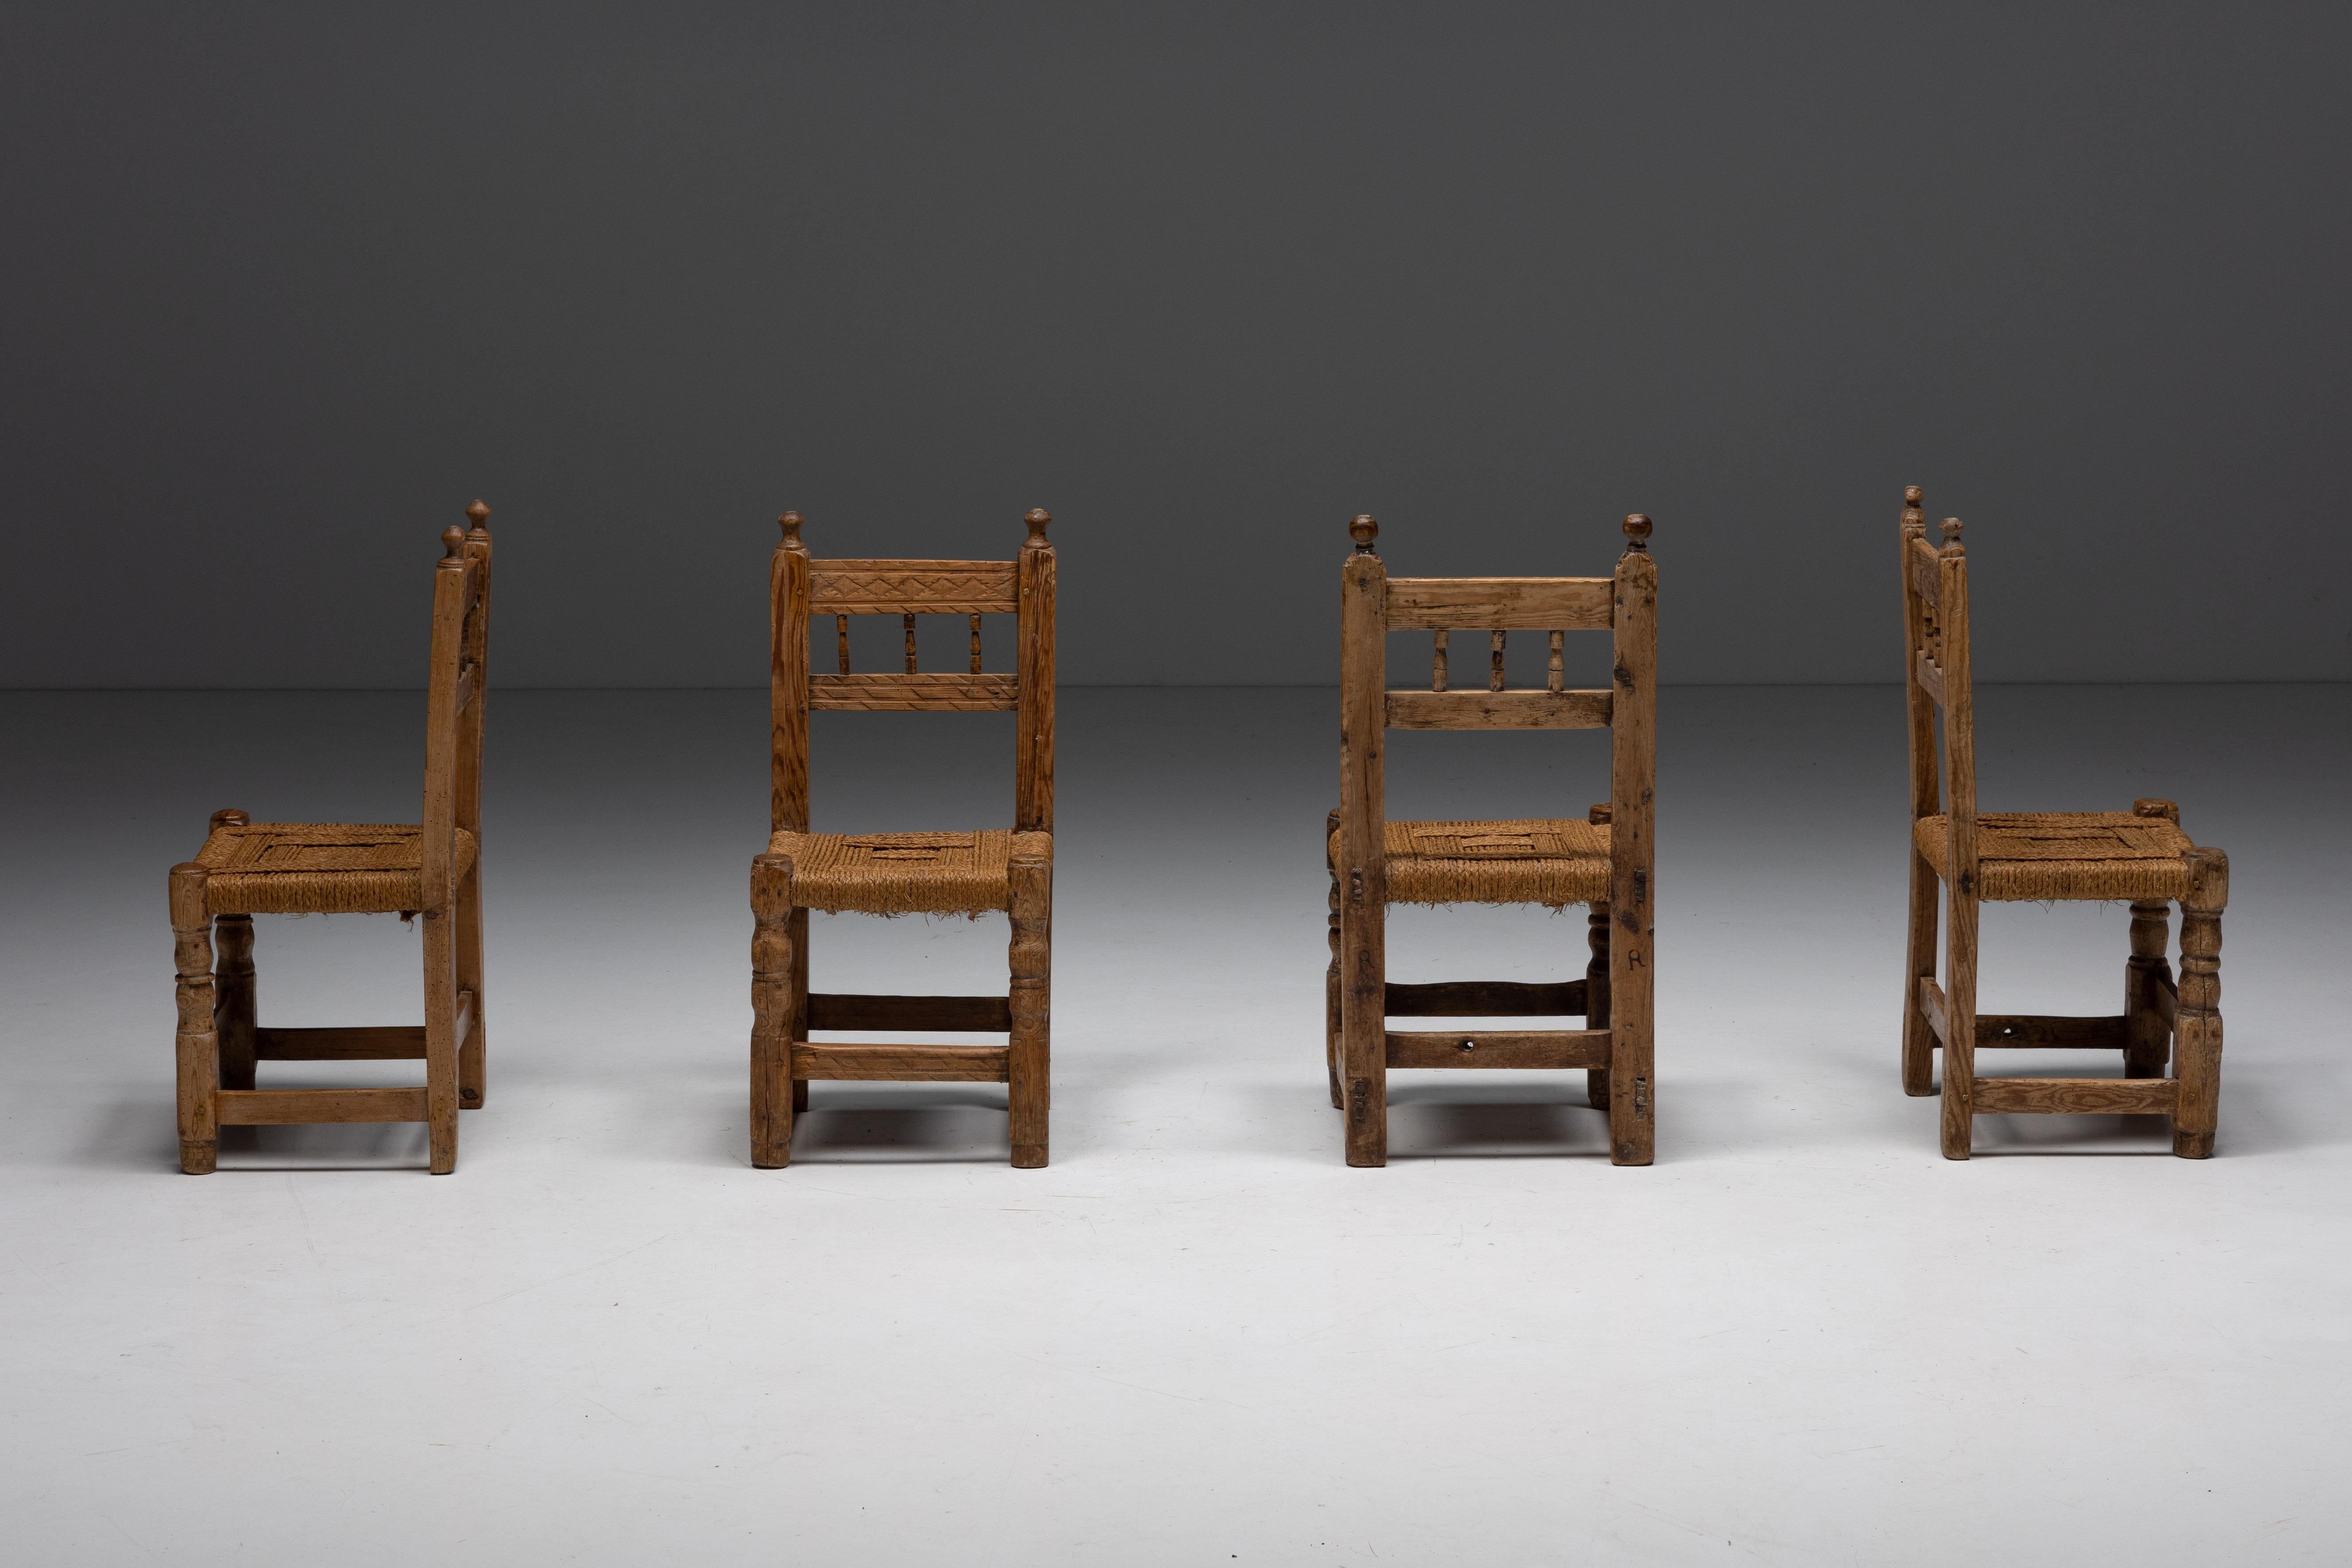 Monoxylite; Spanish Pyrenees; 19th Century; Spain; Straw Seating; Wooden Chairs; Wabi Sabi; Naive; Folk Art; Travail Populaire;

Dining chairs showcasing the raw beauty of Spanish craftsmanship from the 19th century. These remarkable chairs embody